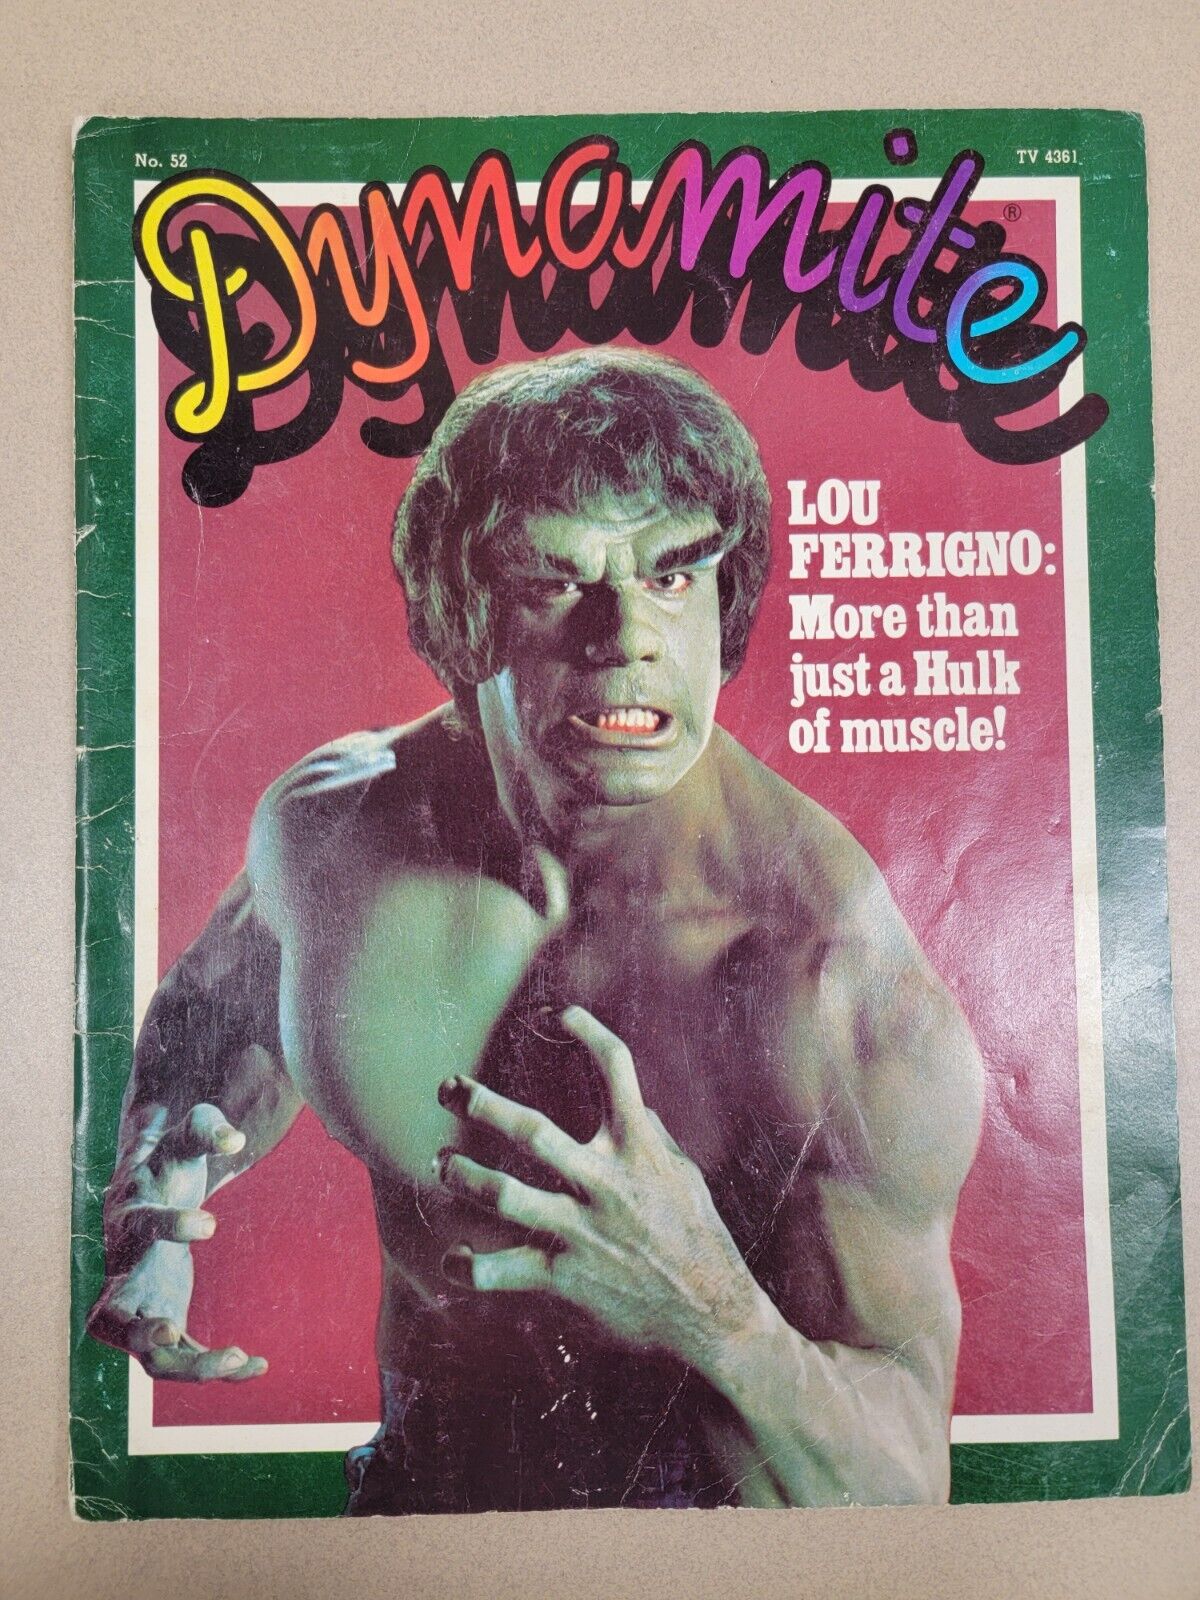 Dynamite #52 Lou Ferrigno More Than Just a Hulk of Muscle 1978 Vintage Magazine